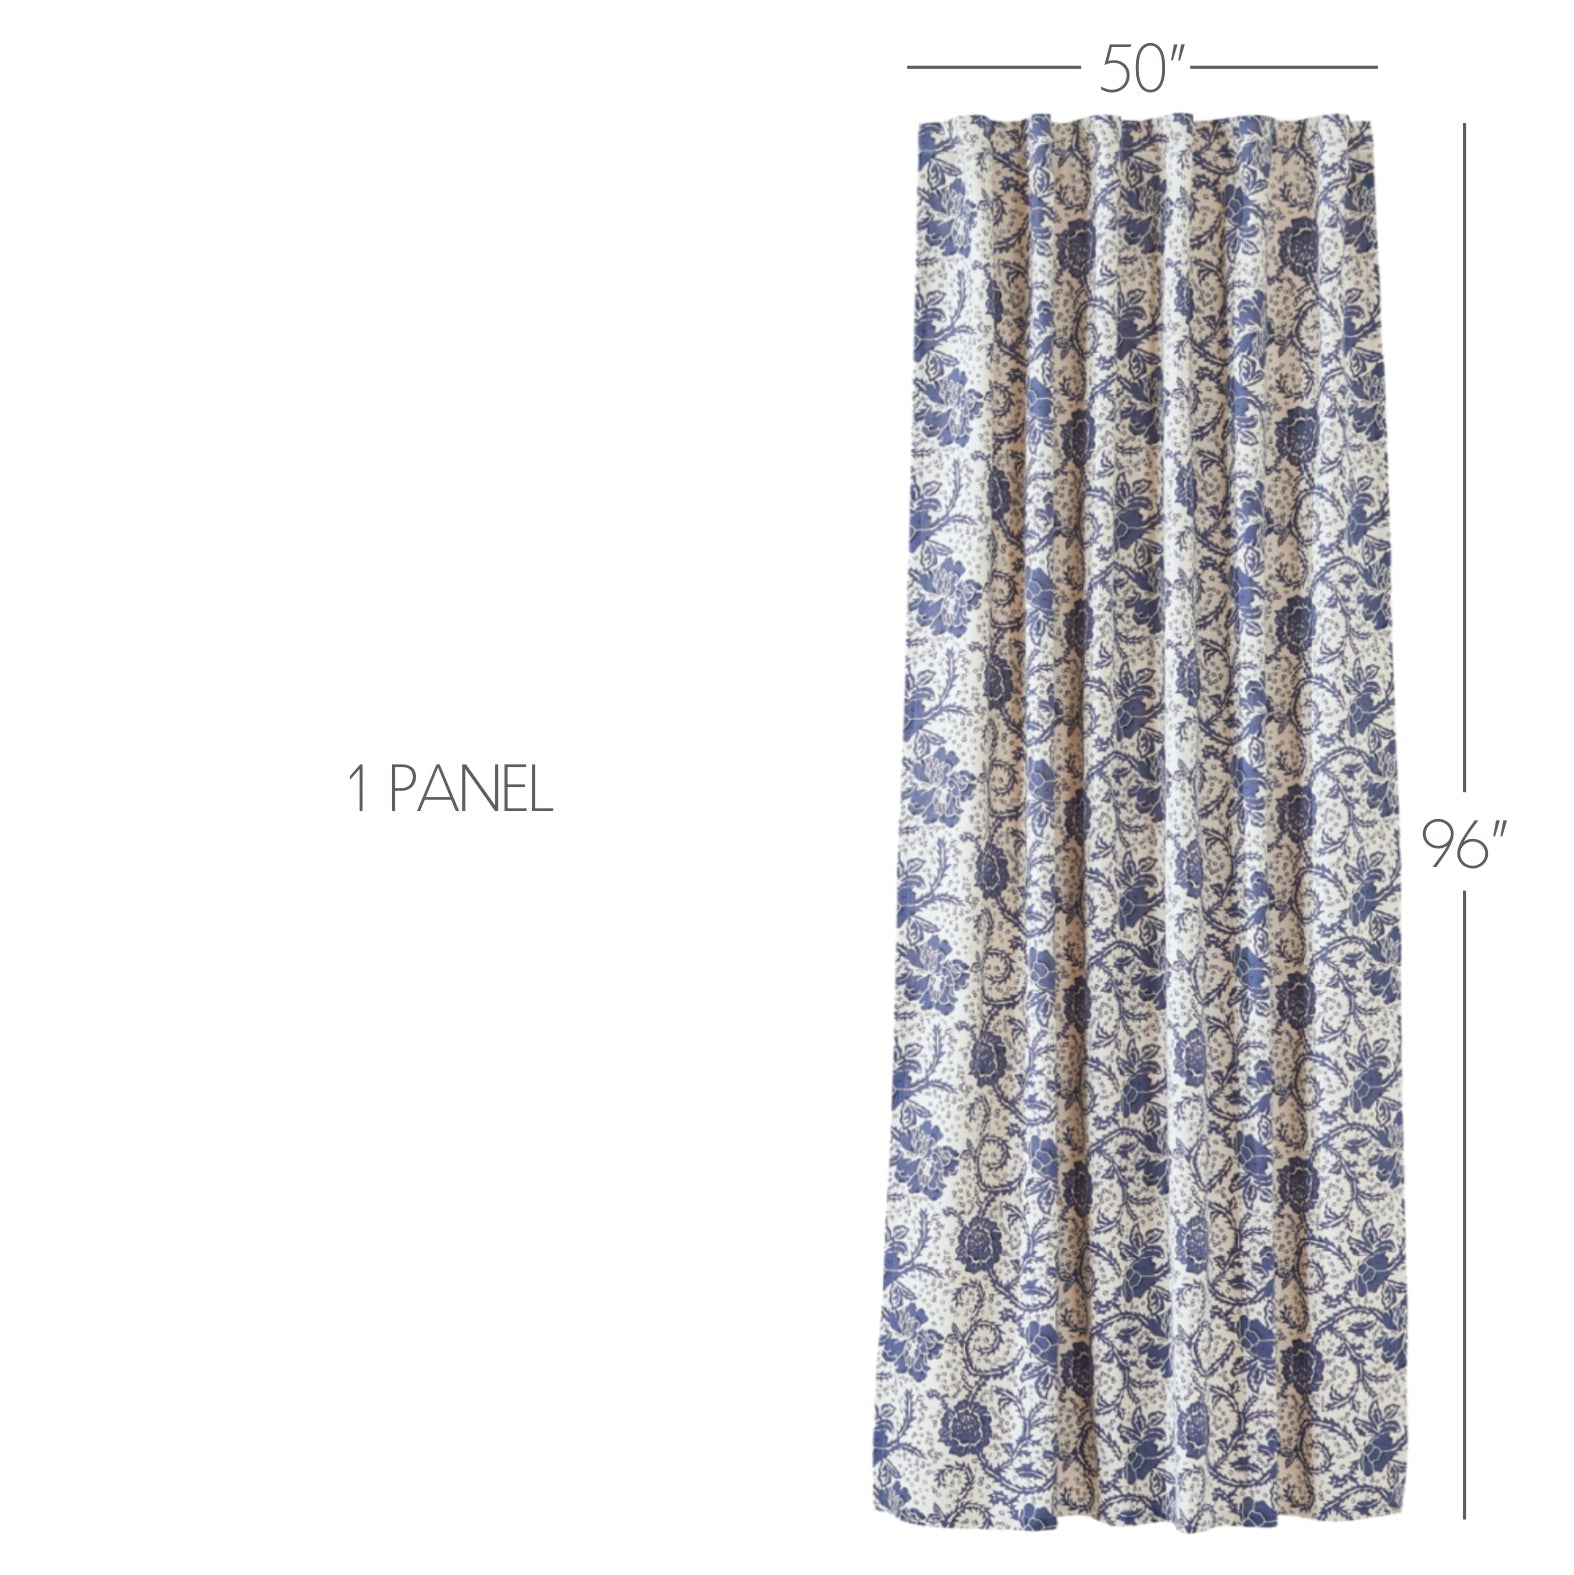 Dorset Navy Floral Panel Curtain 96x50 VHC Brands